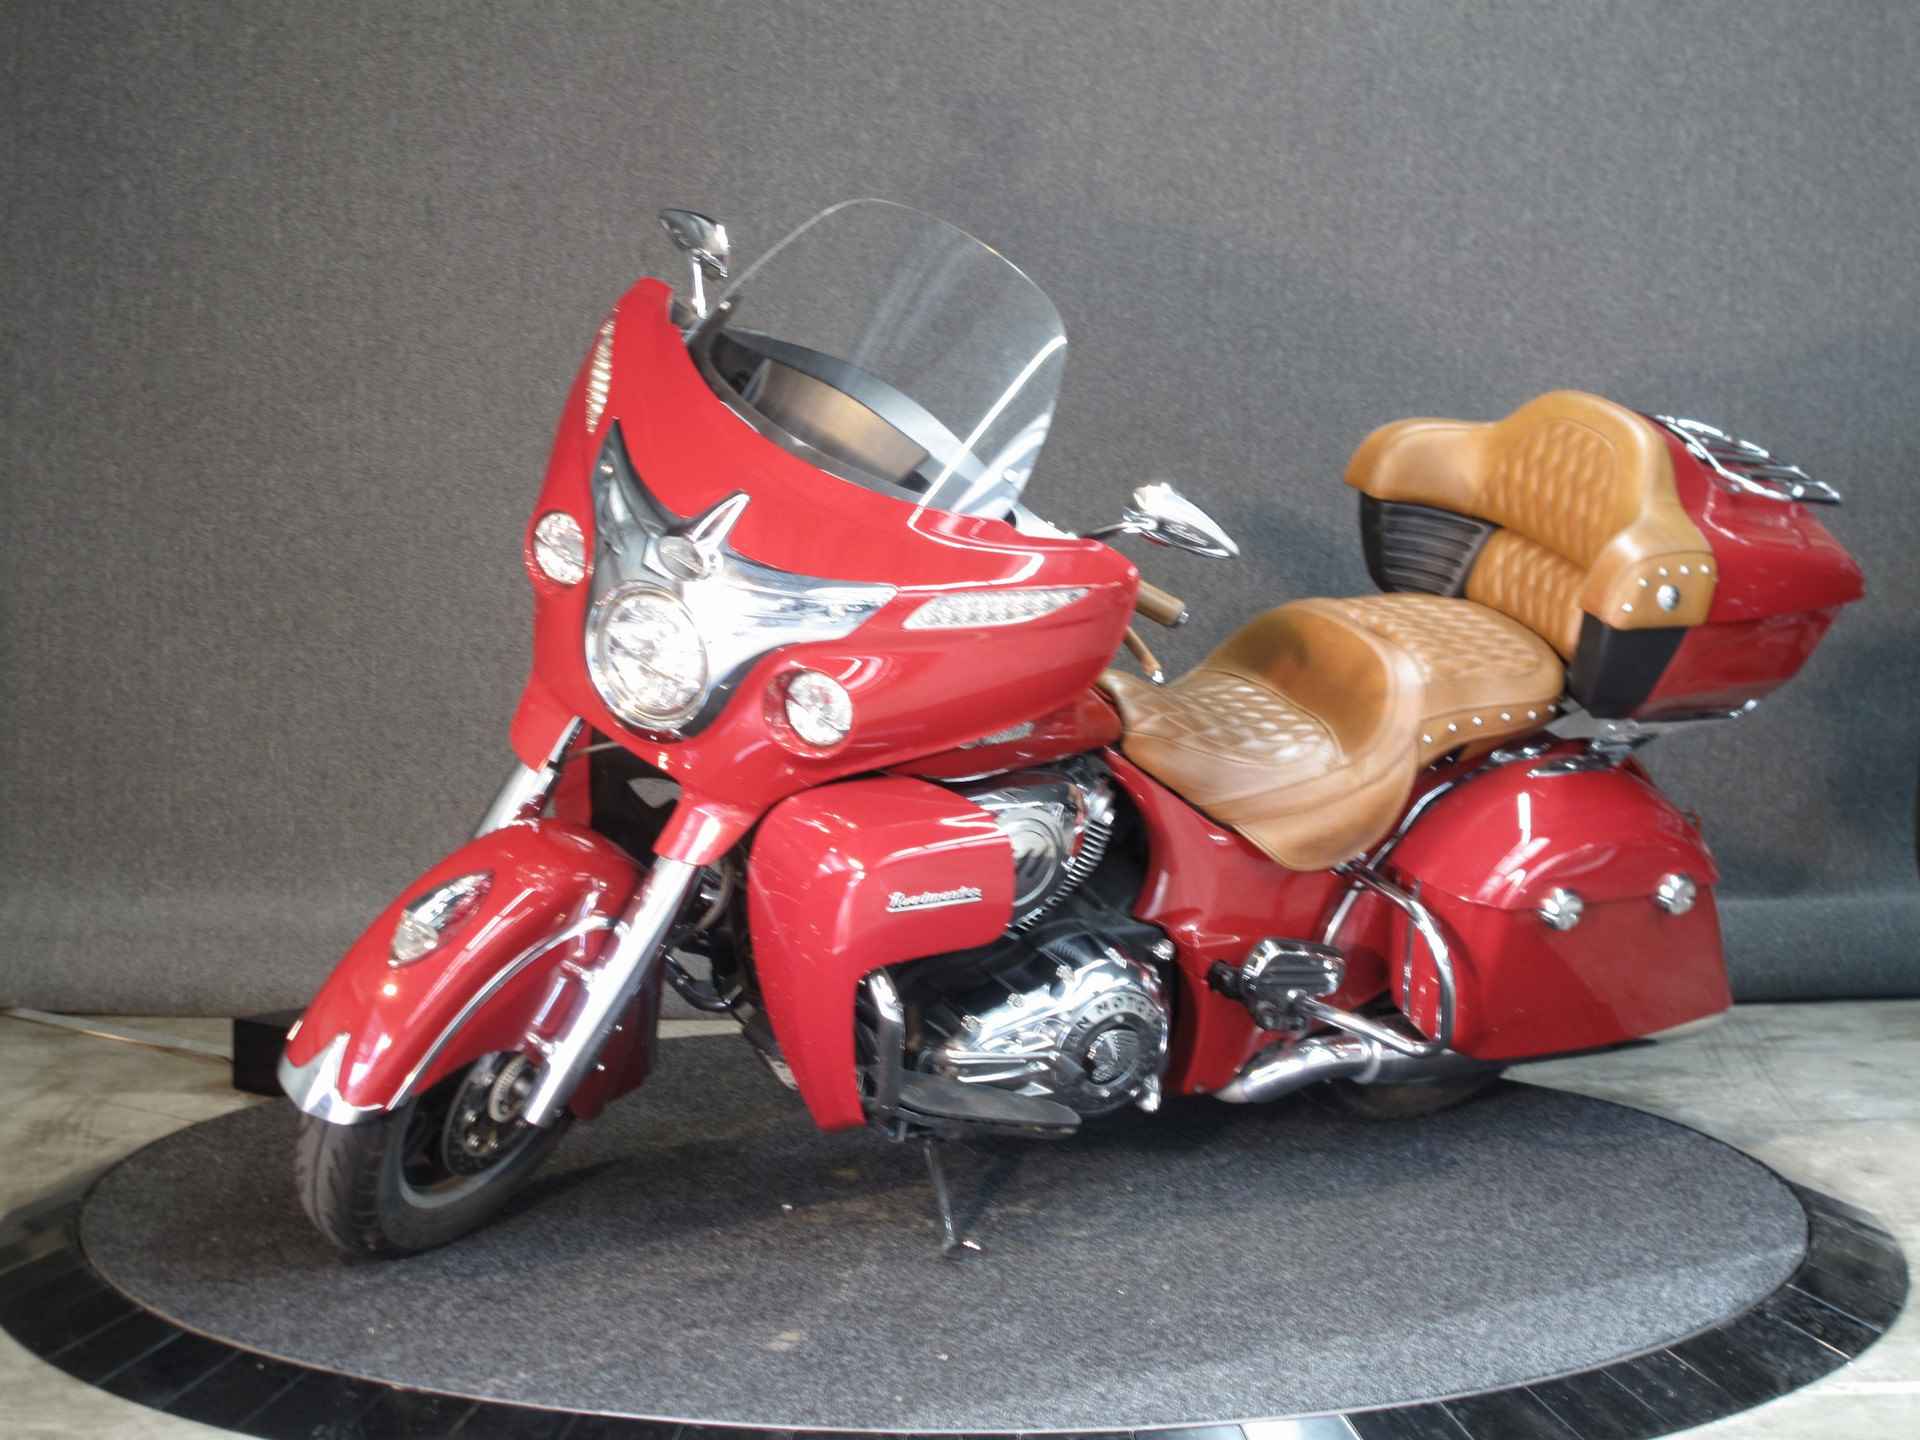 Indian Roadmaster The official Indian Motorcycle Dealer - 10/13